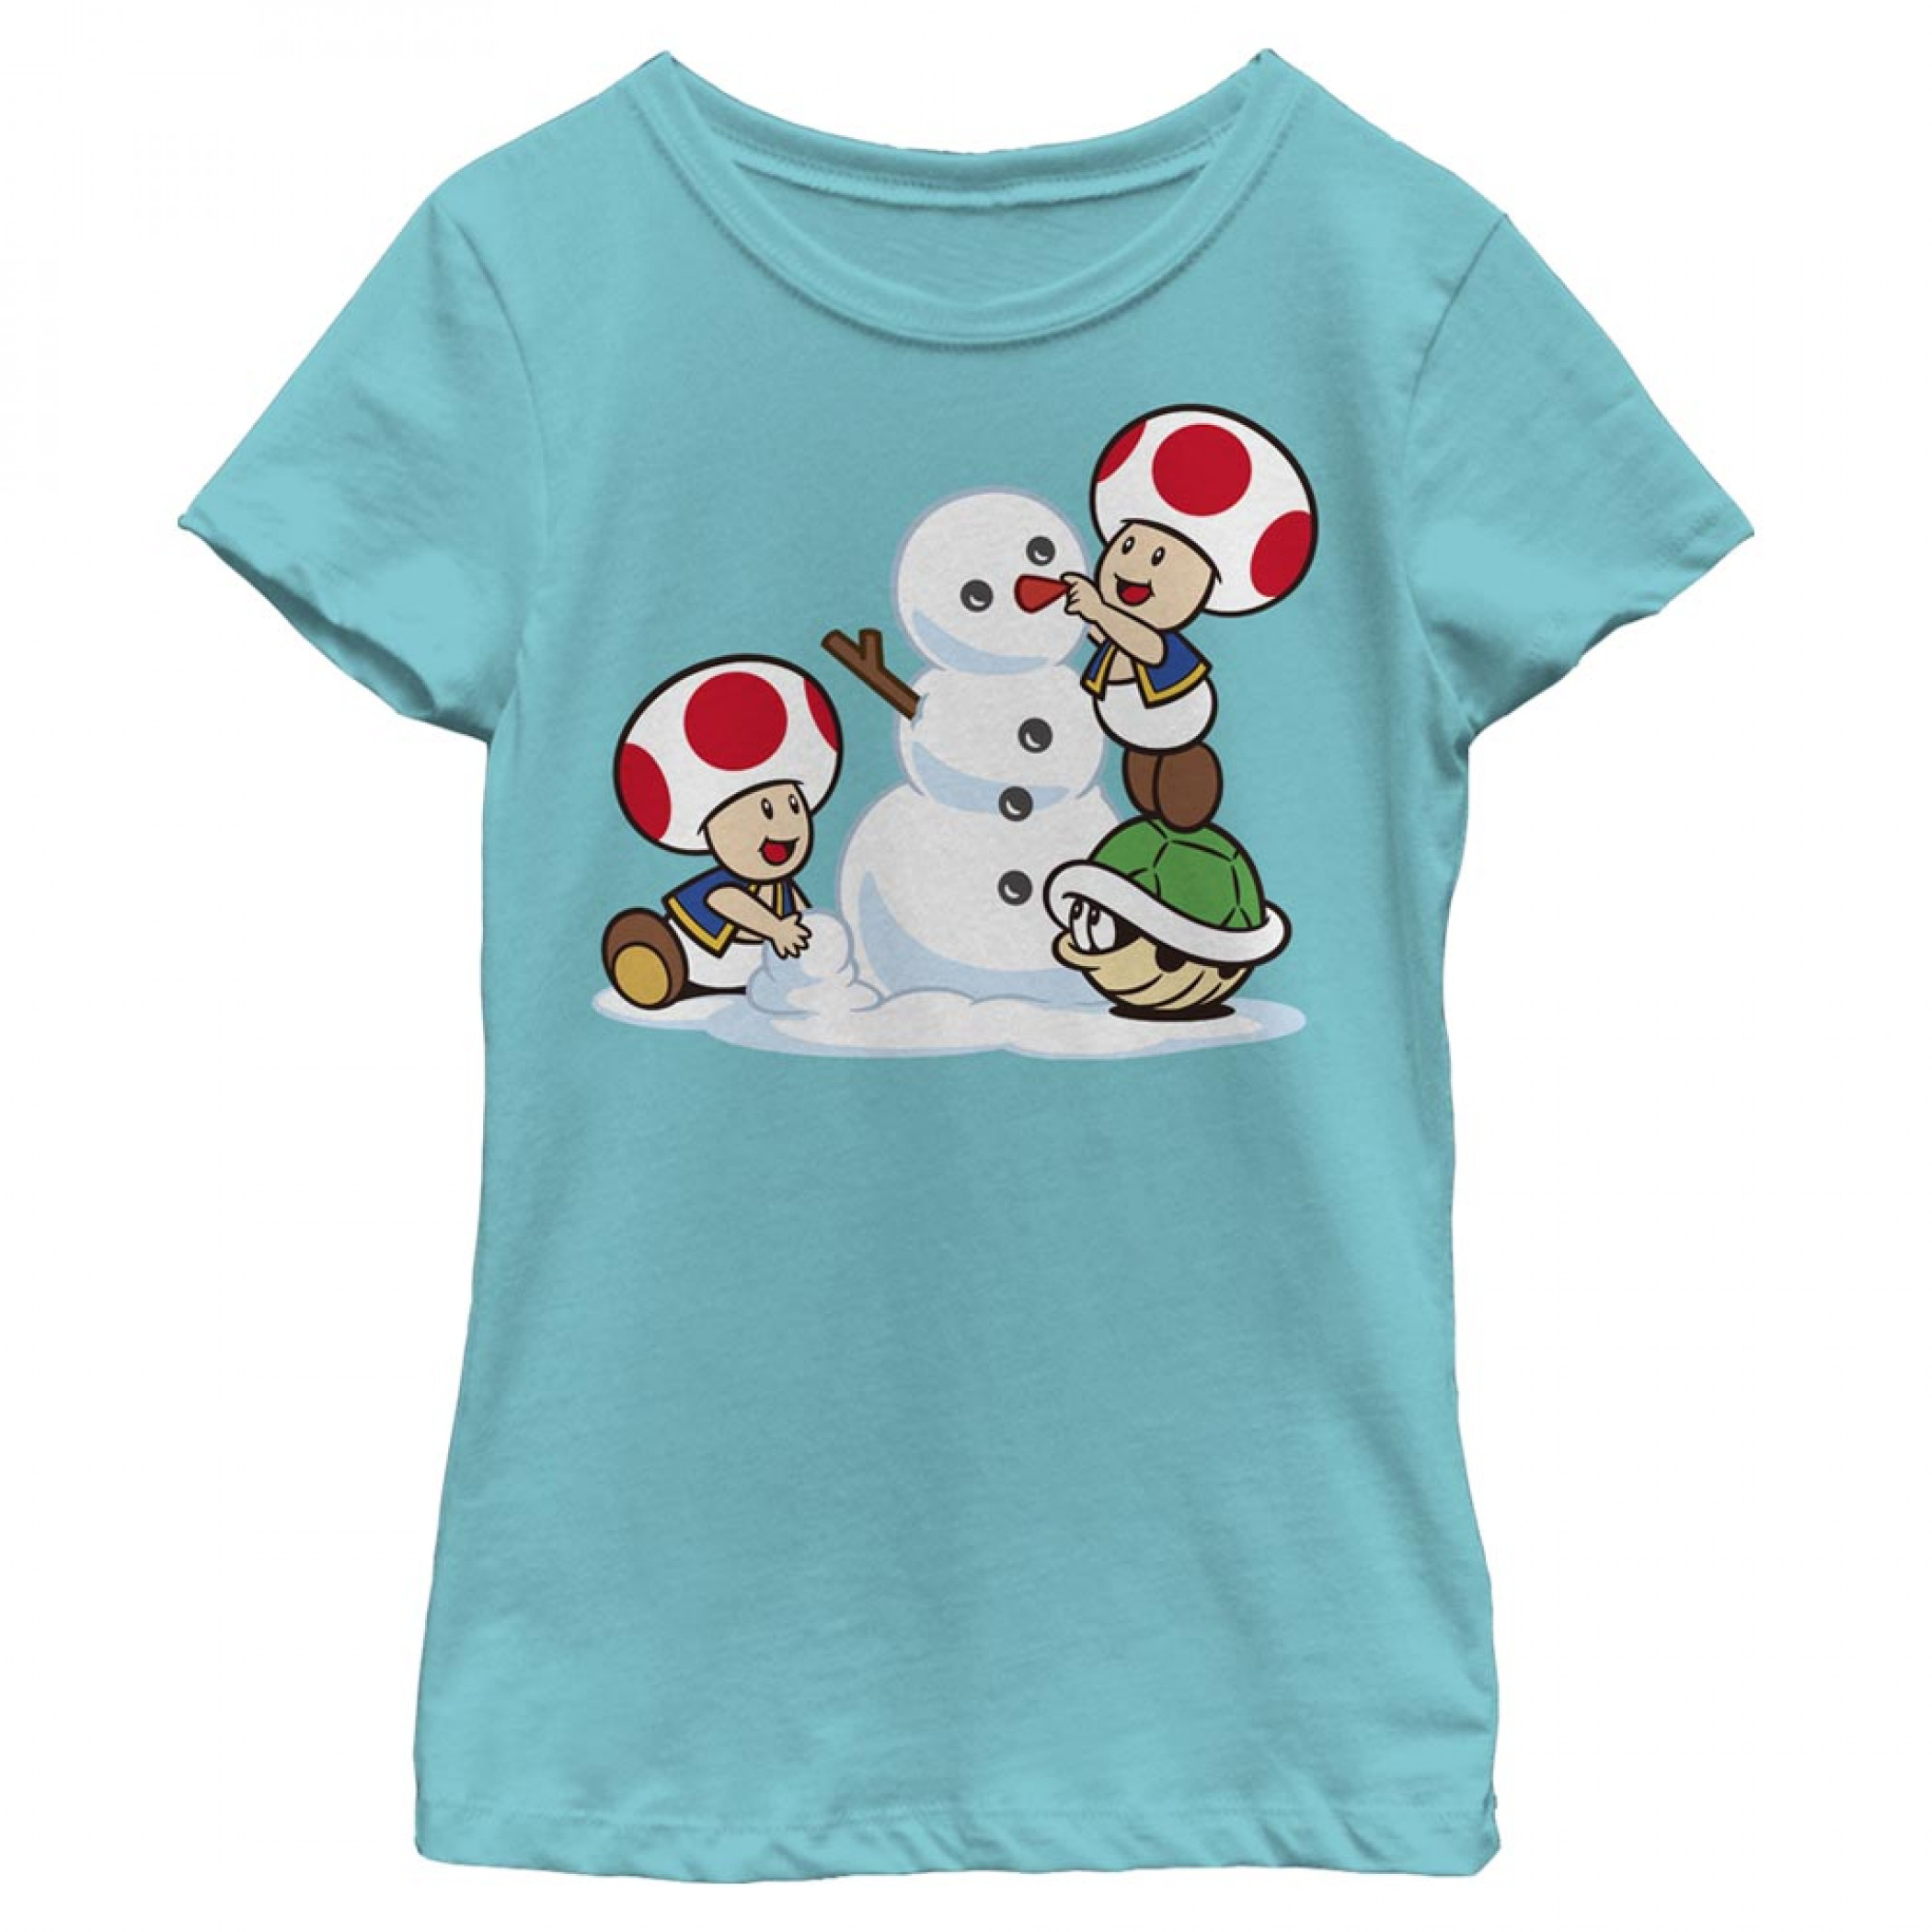 Super Mario Bros. Toad and the Kinopio Getting Frosty Youth Girl's T-Shirt